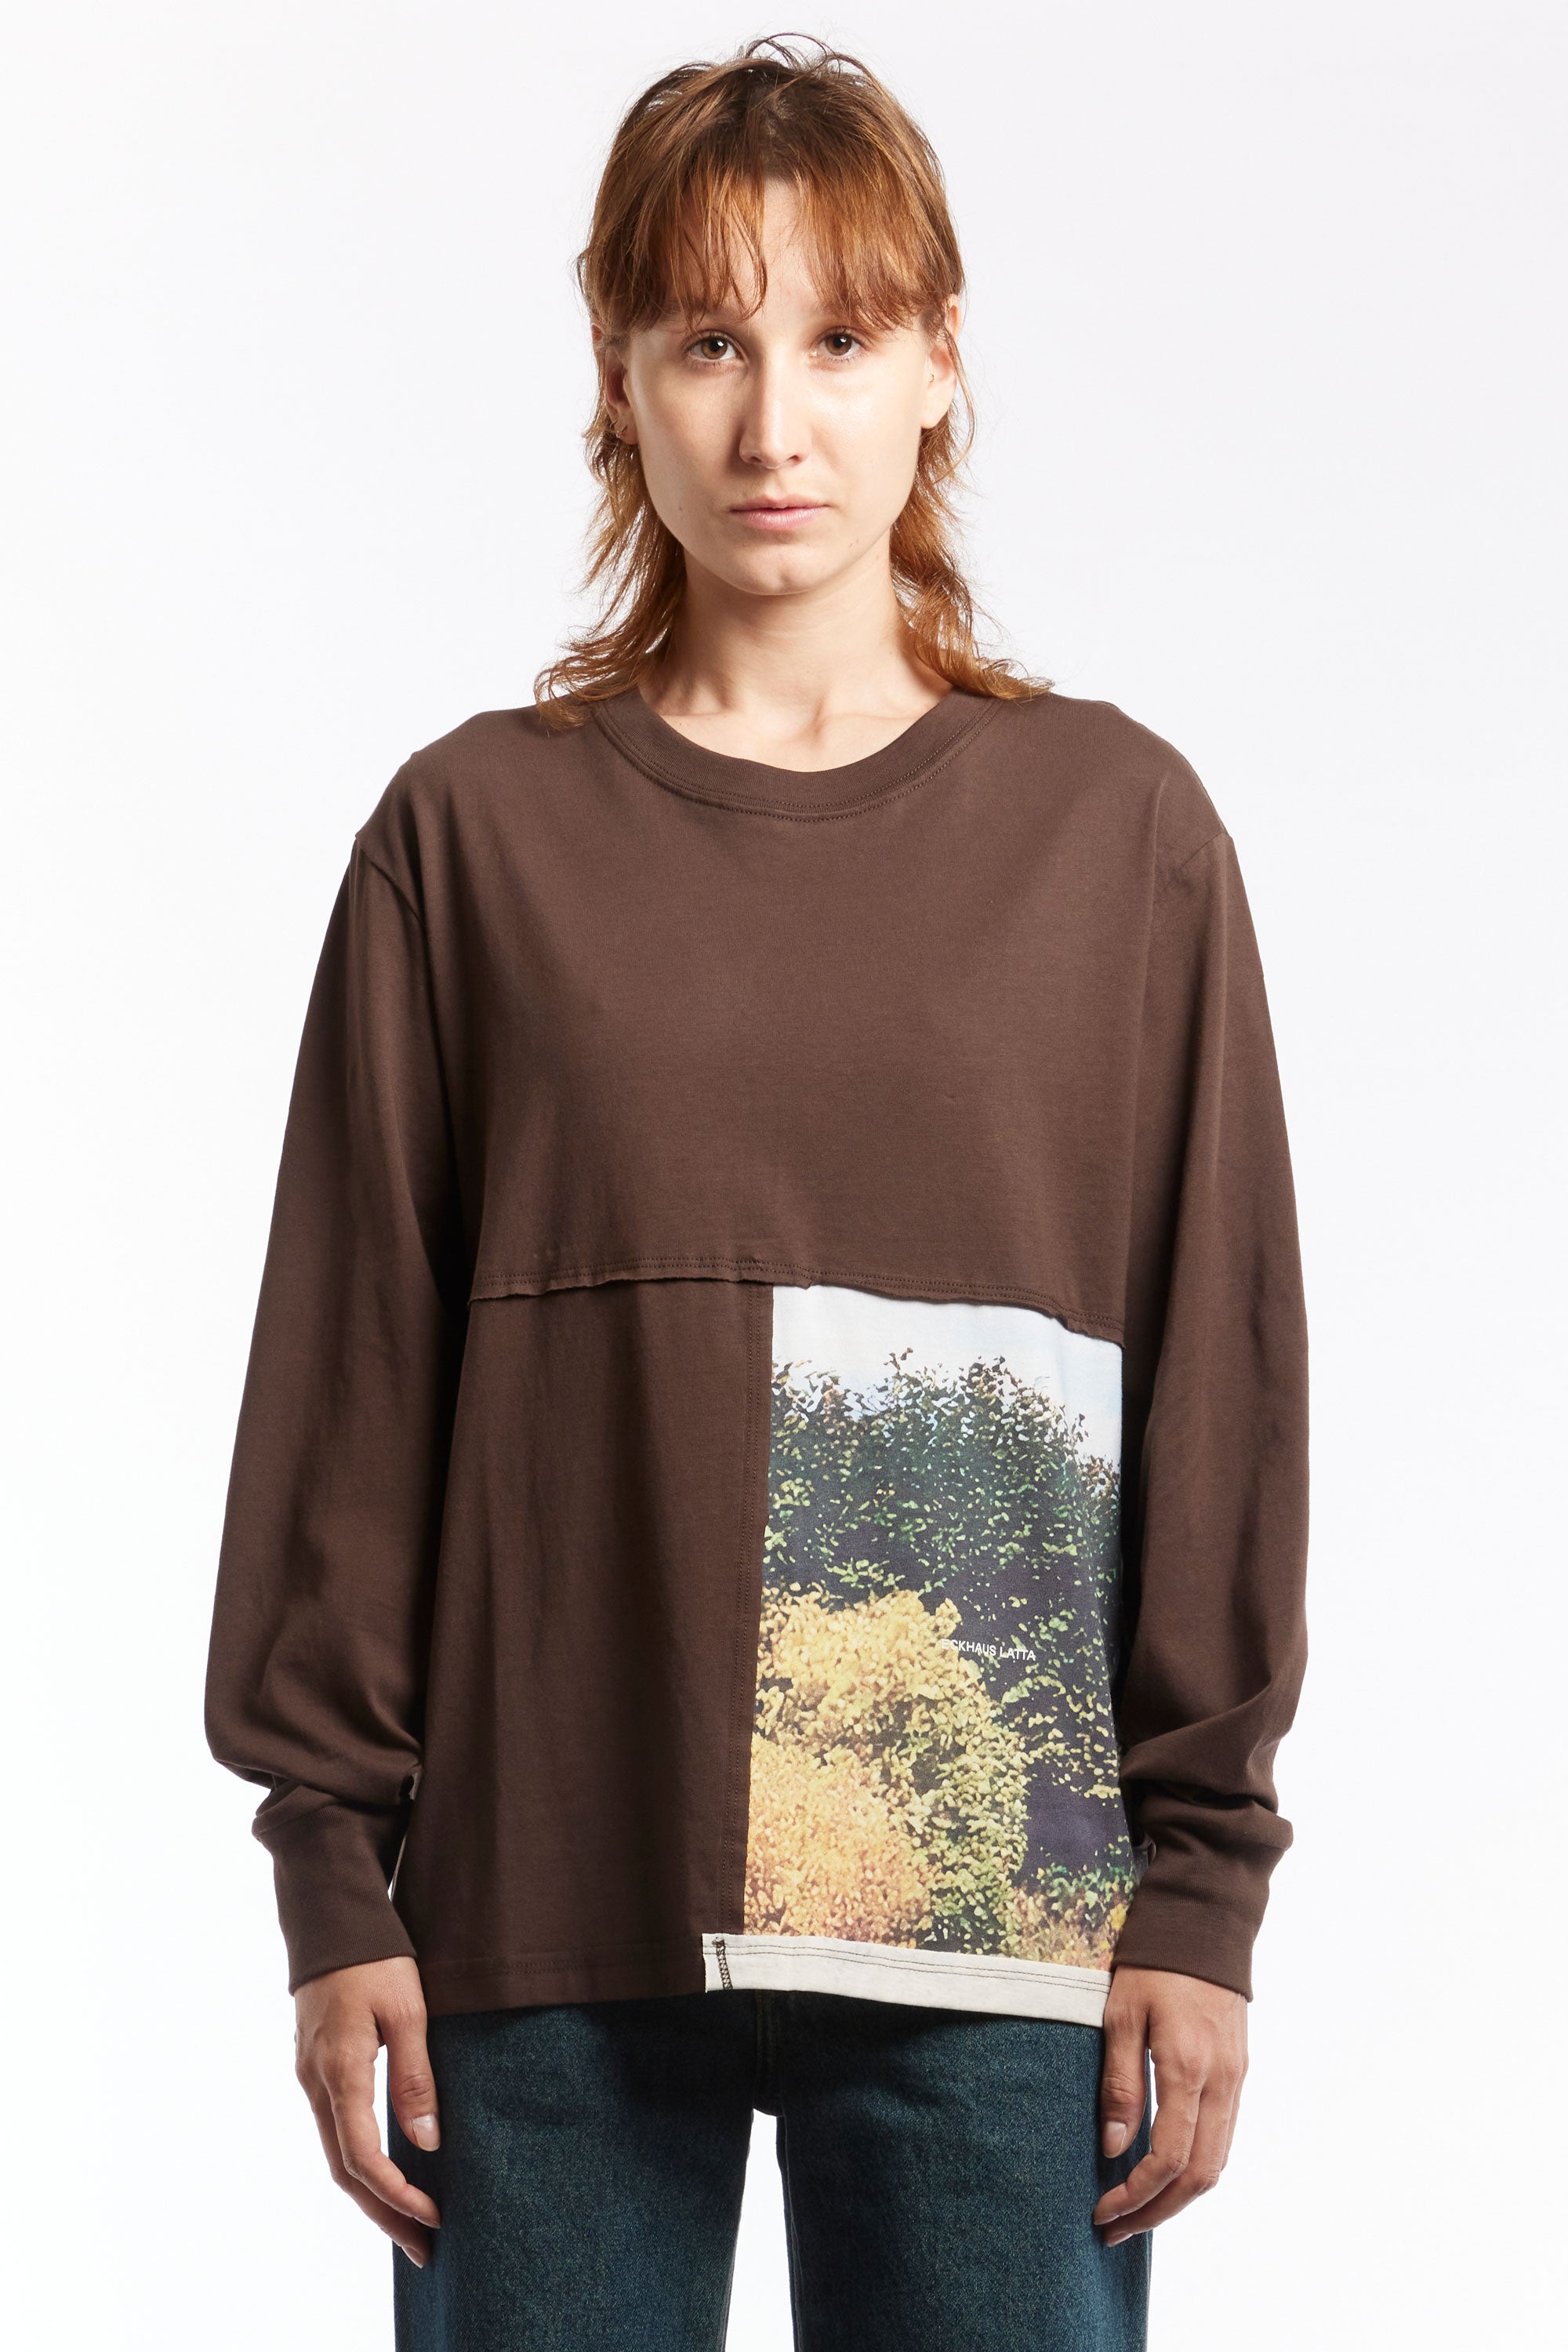 The ECKHAUS LATTA - LAPPED LONGSLEEVE FOLIAGE  available online with global shipping, and in PAM Stores Melbourne and Sydney.